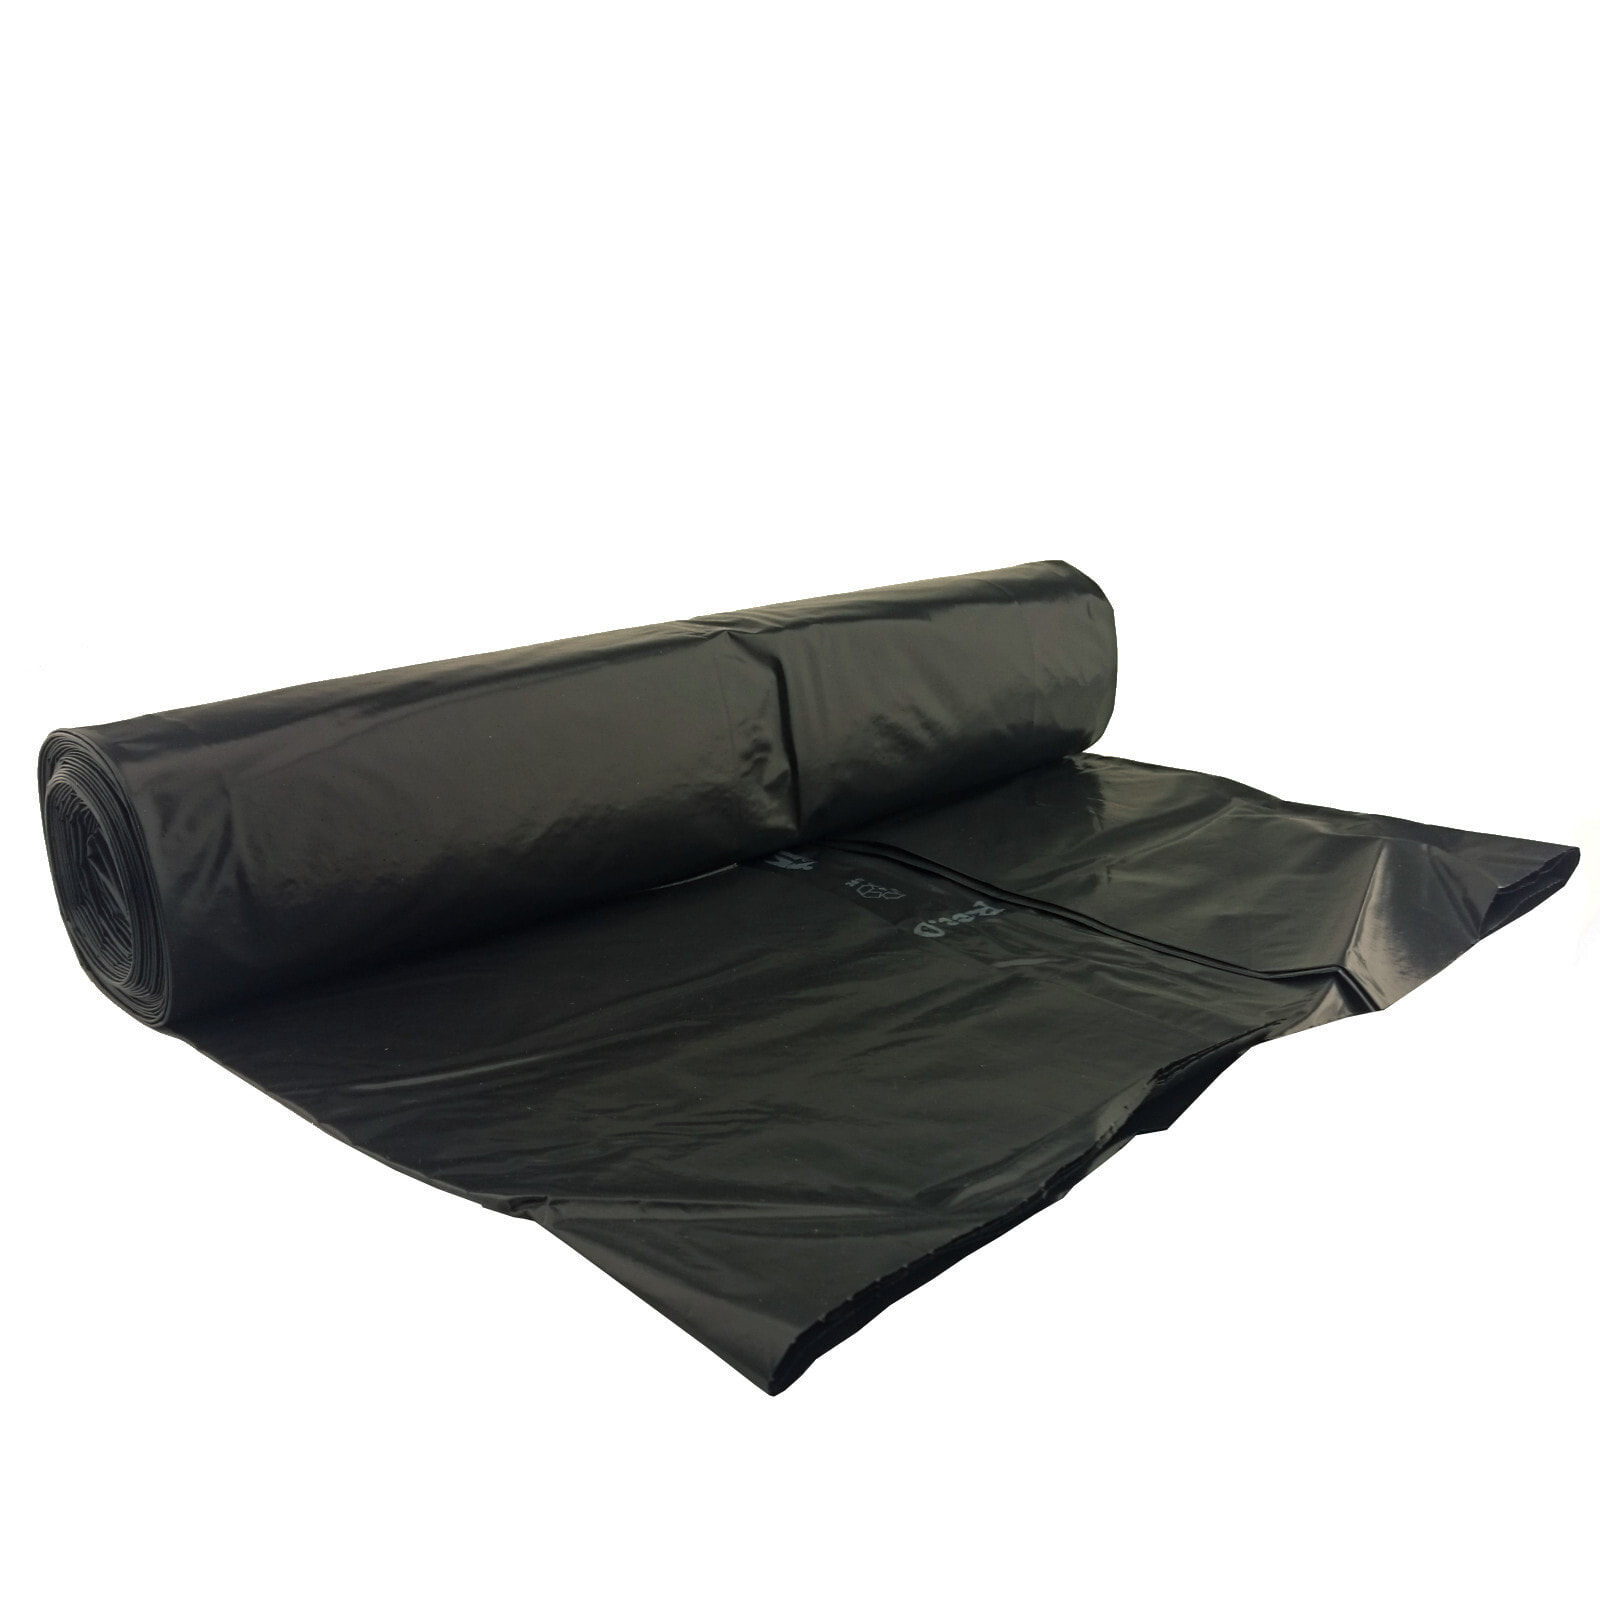 50 micron thick garbage bags. durable roll 25 pcs. - black 120L